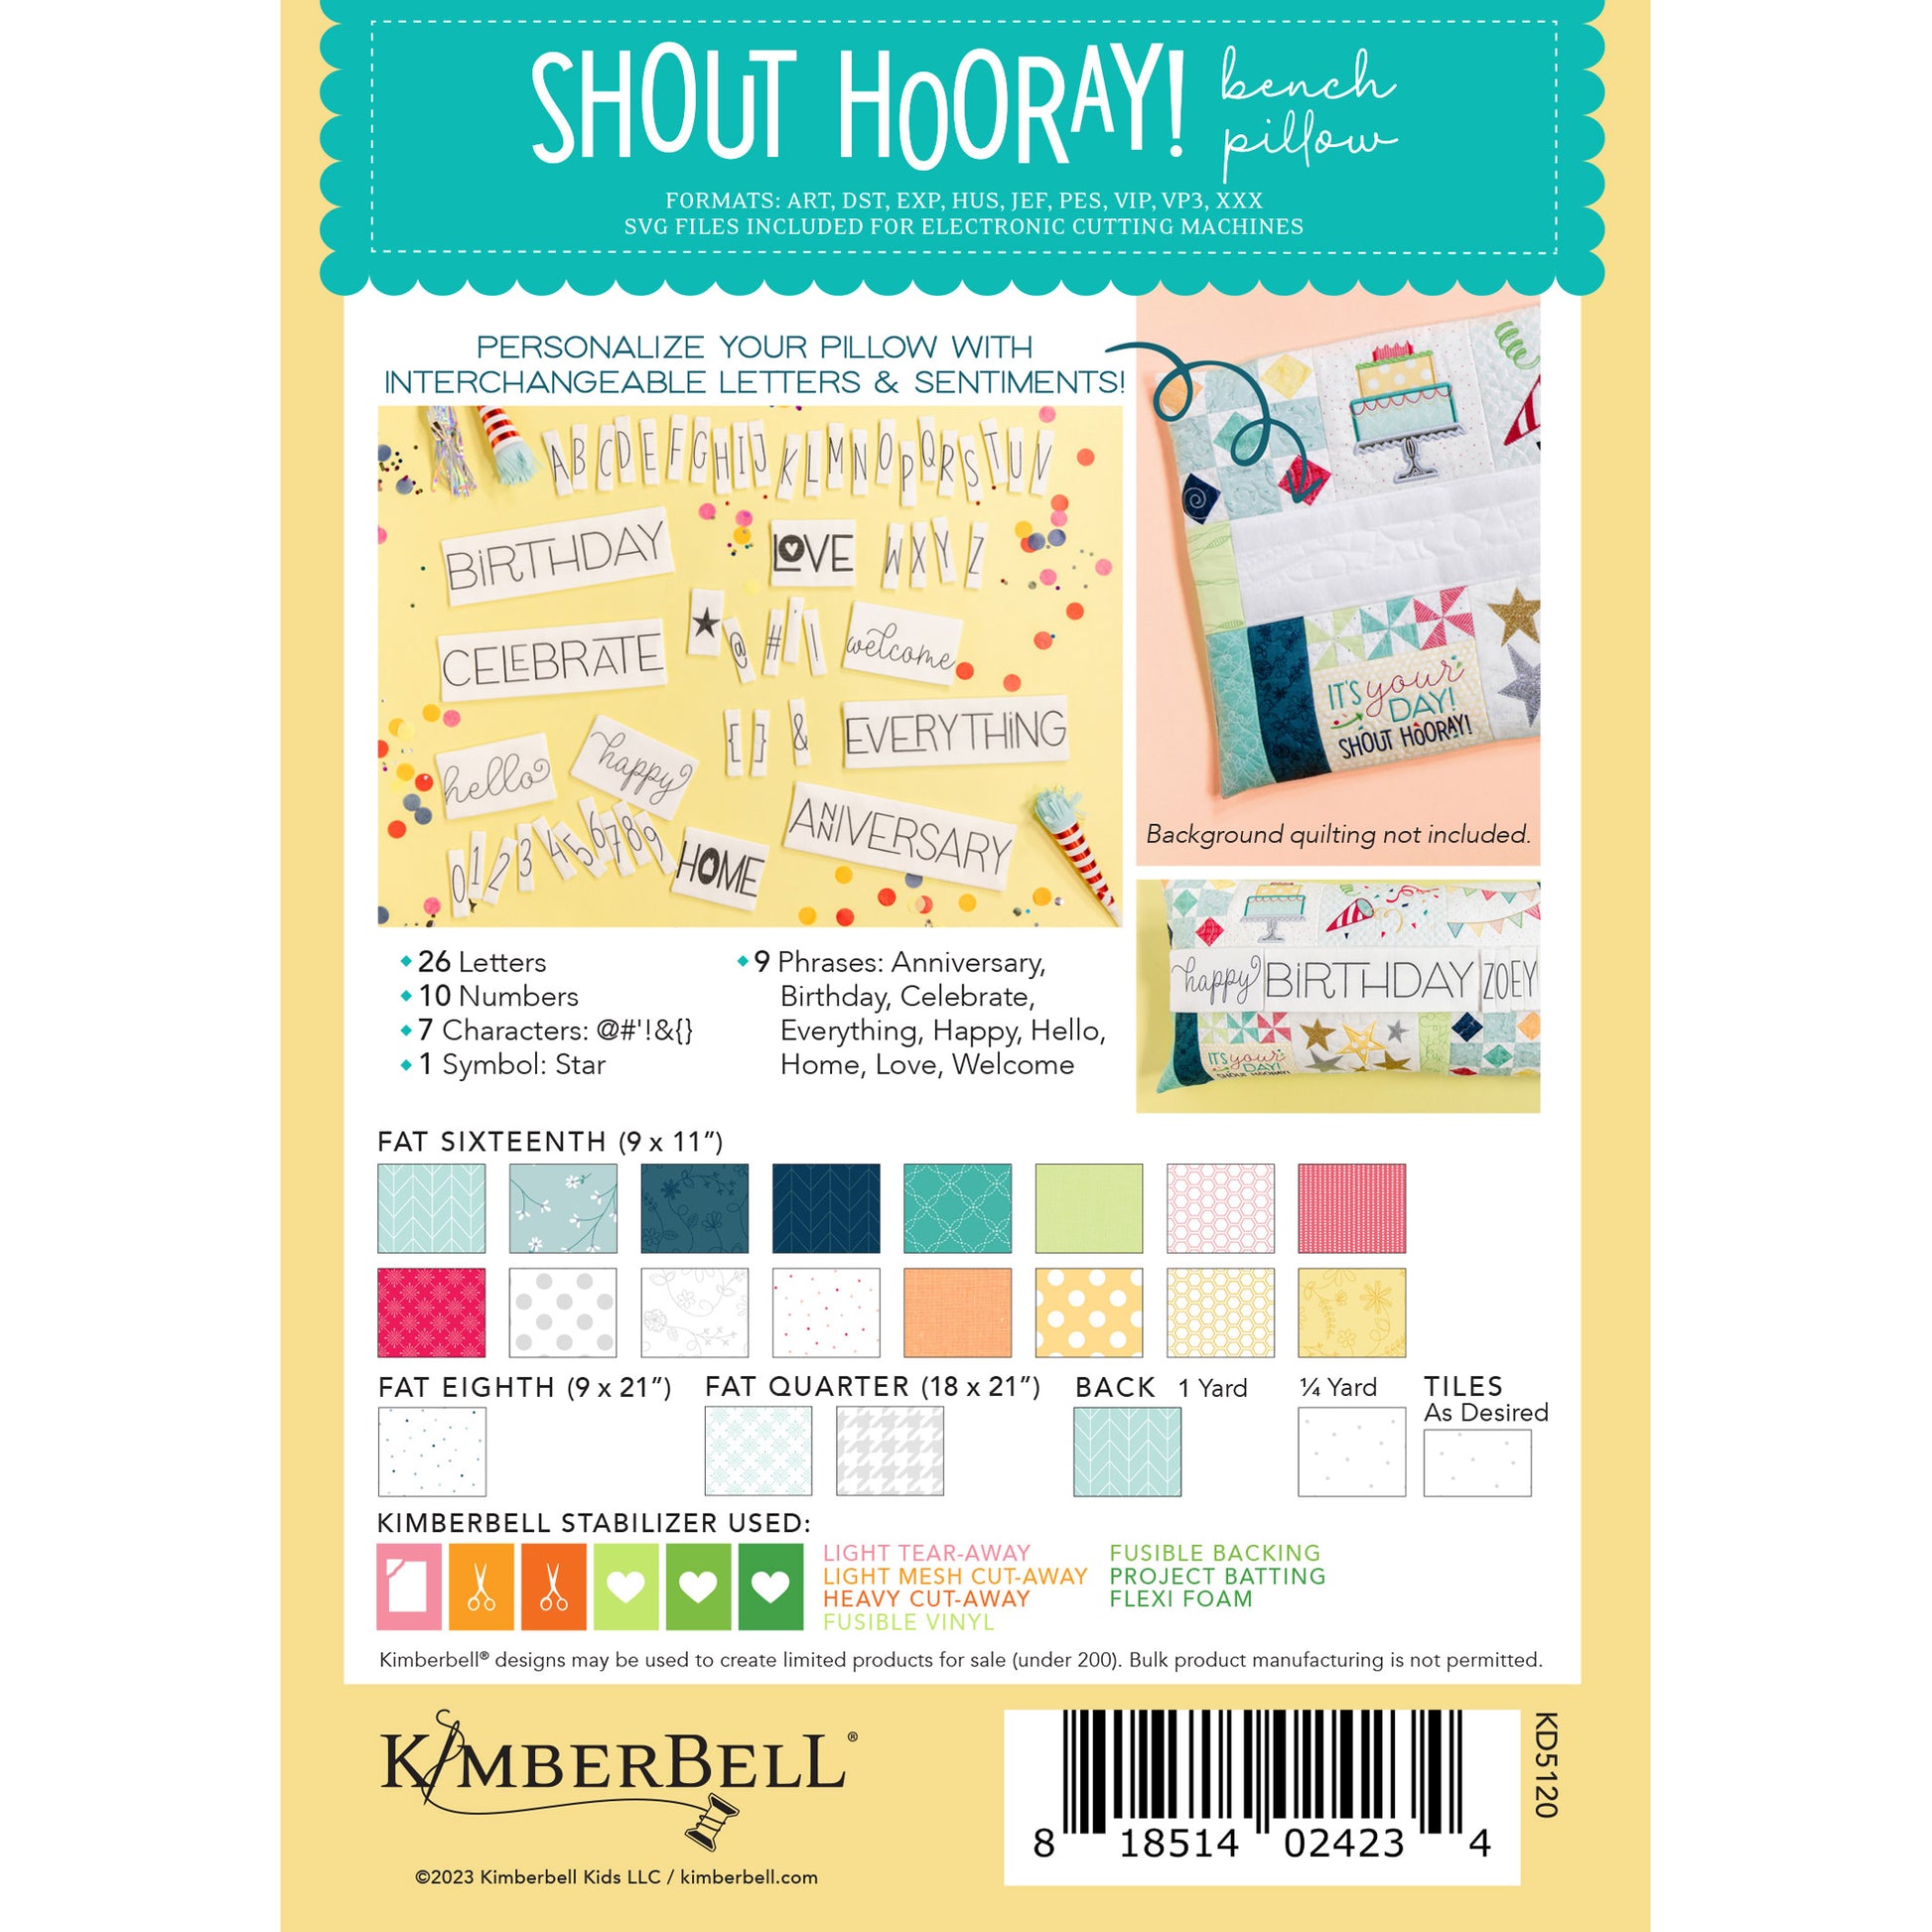 Kimberbell’s Shout Hooray! Bench Pillow Pattern (KD5120) celebrates the people you love with confetti, cake, and more! Stitch names, dates, and greetings with the included alphabet and sentiments, then feature your message in the letterboard panel. Image shows the back packaging.